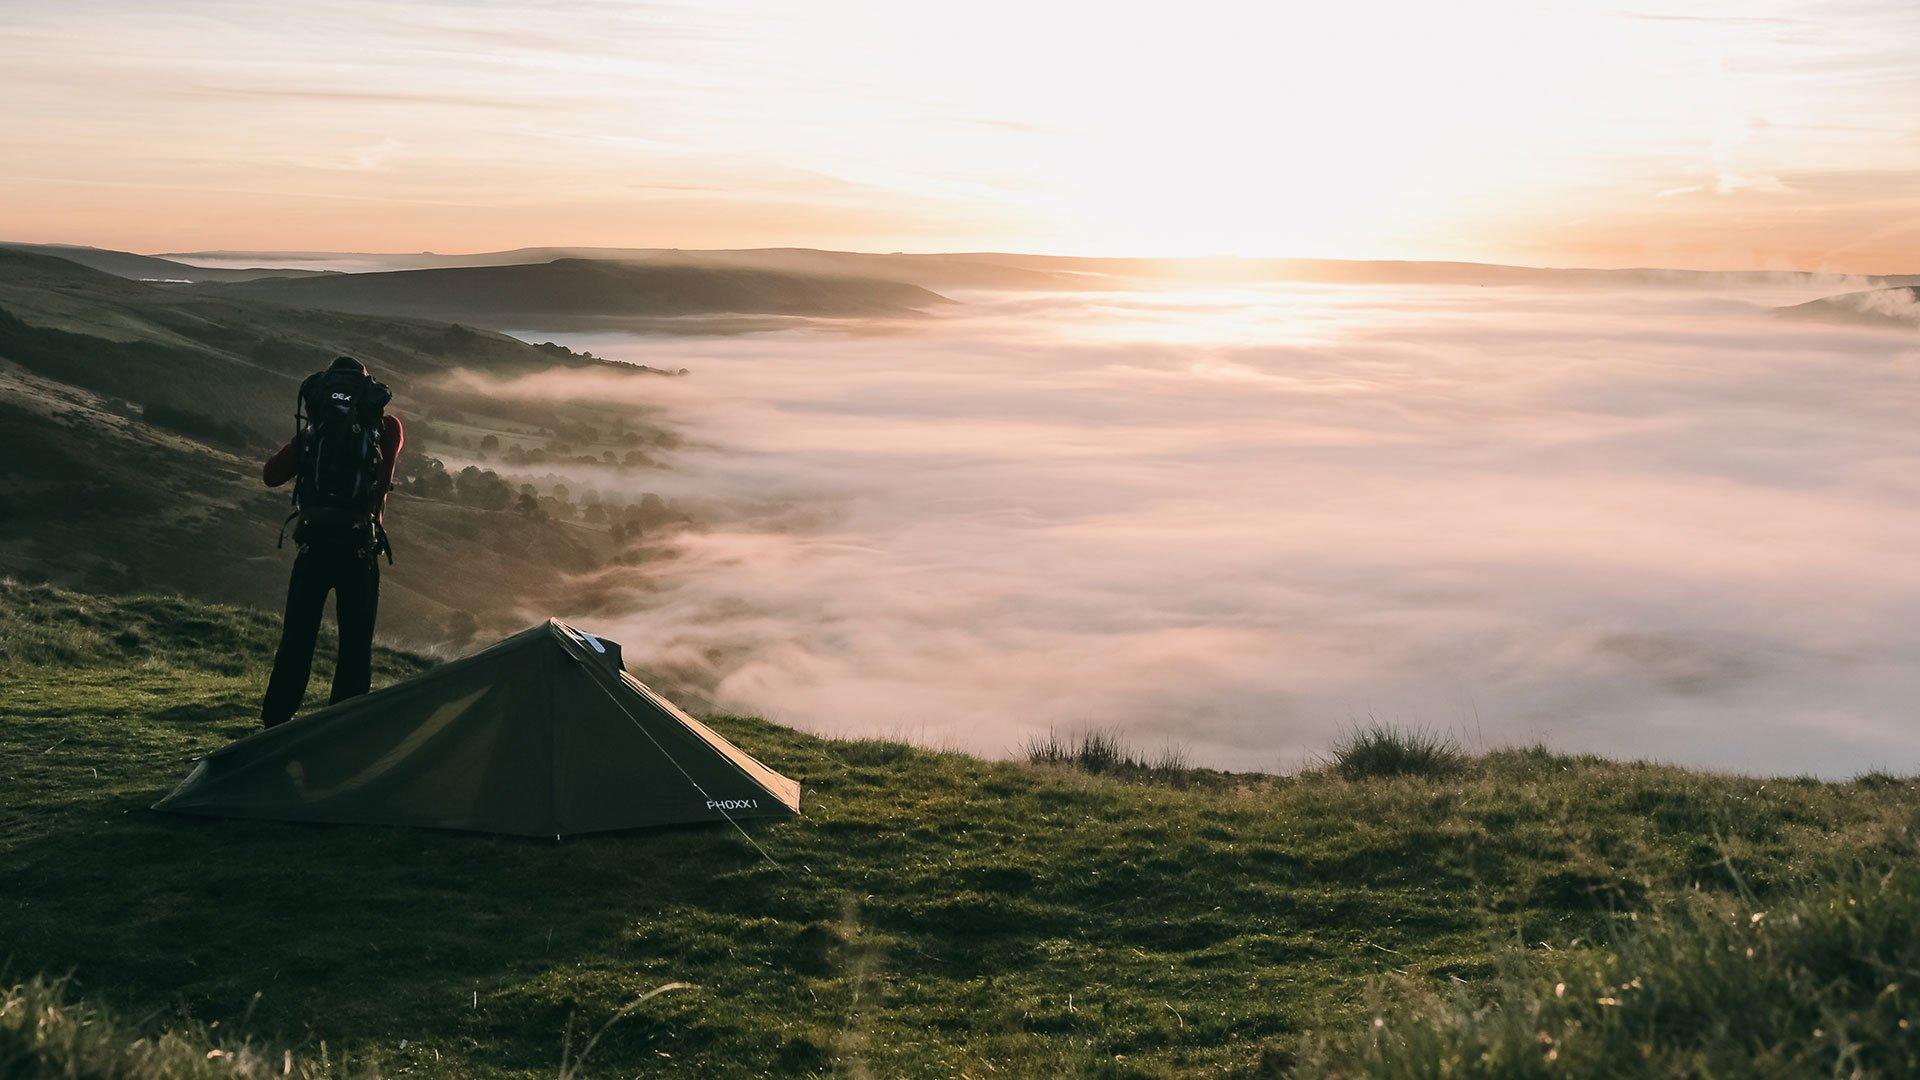 An image of man looking over a mountain range with a backpacking tent in the foreground at sunset